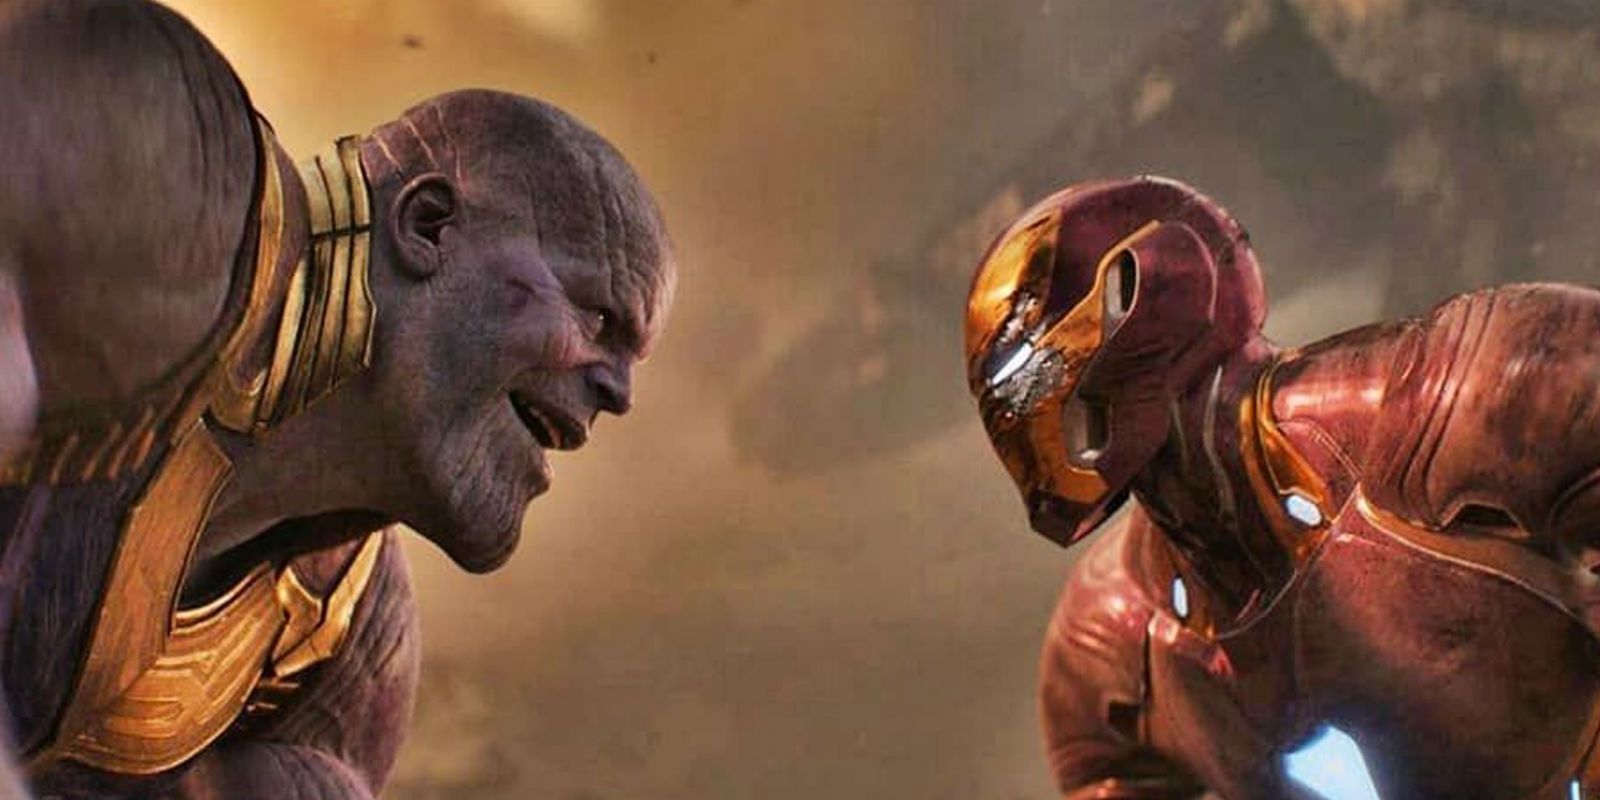 Thanos goes head to head with Iron Man